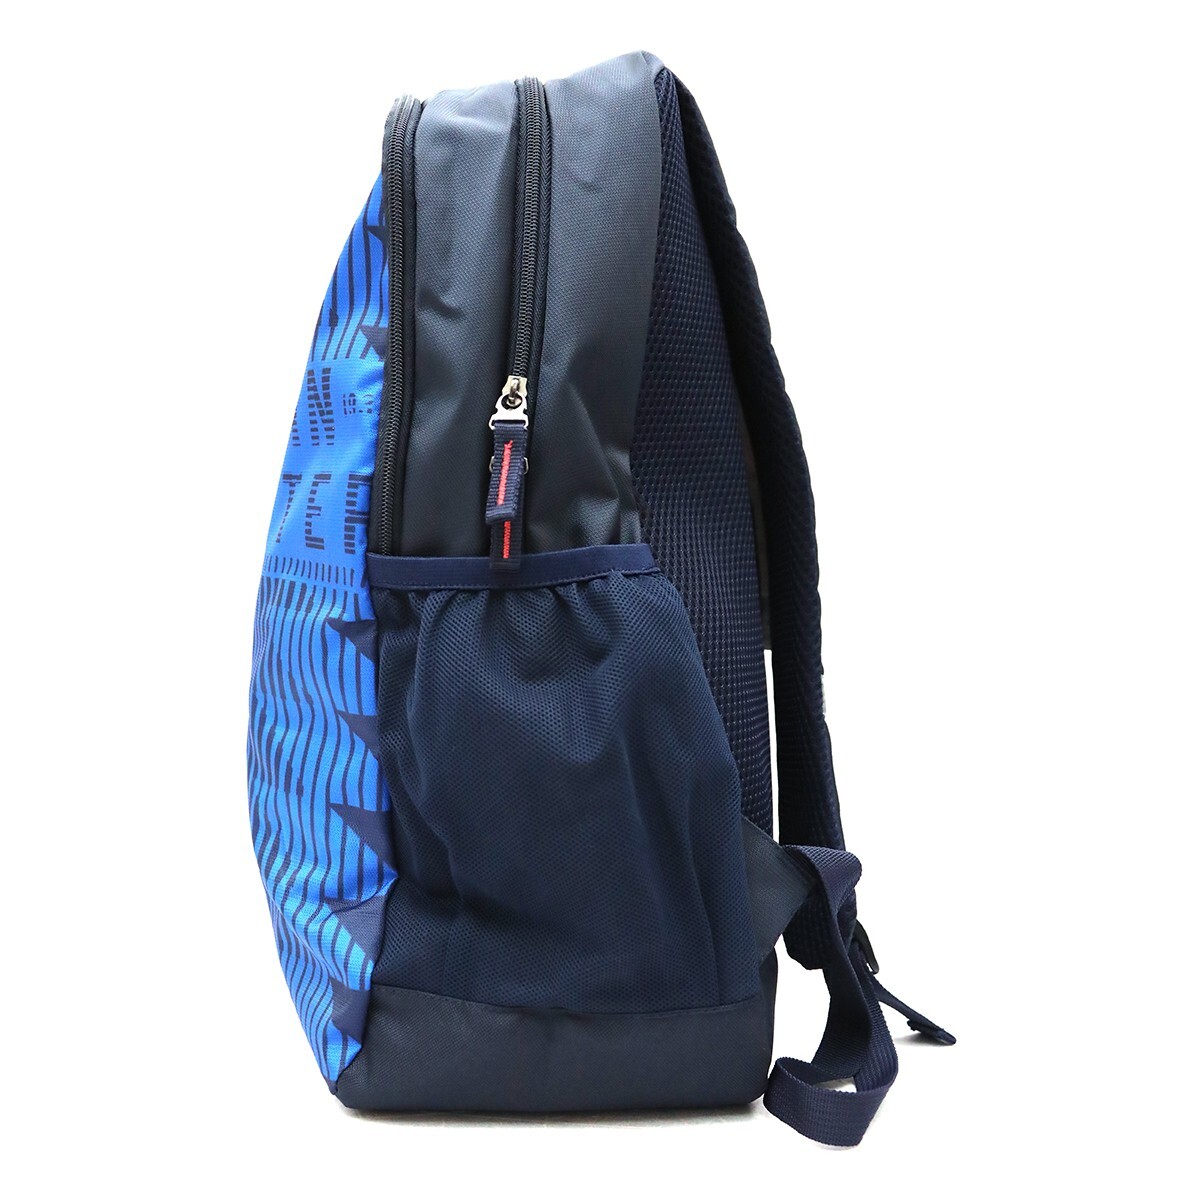 American Tourister Max+ BackPack 01 Blue